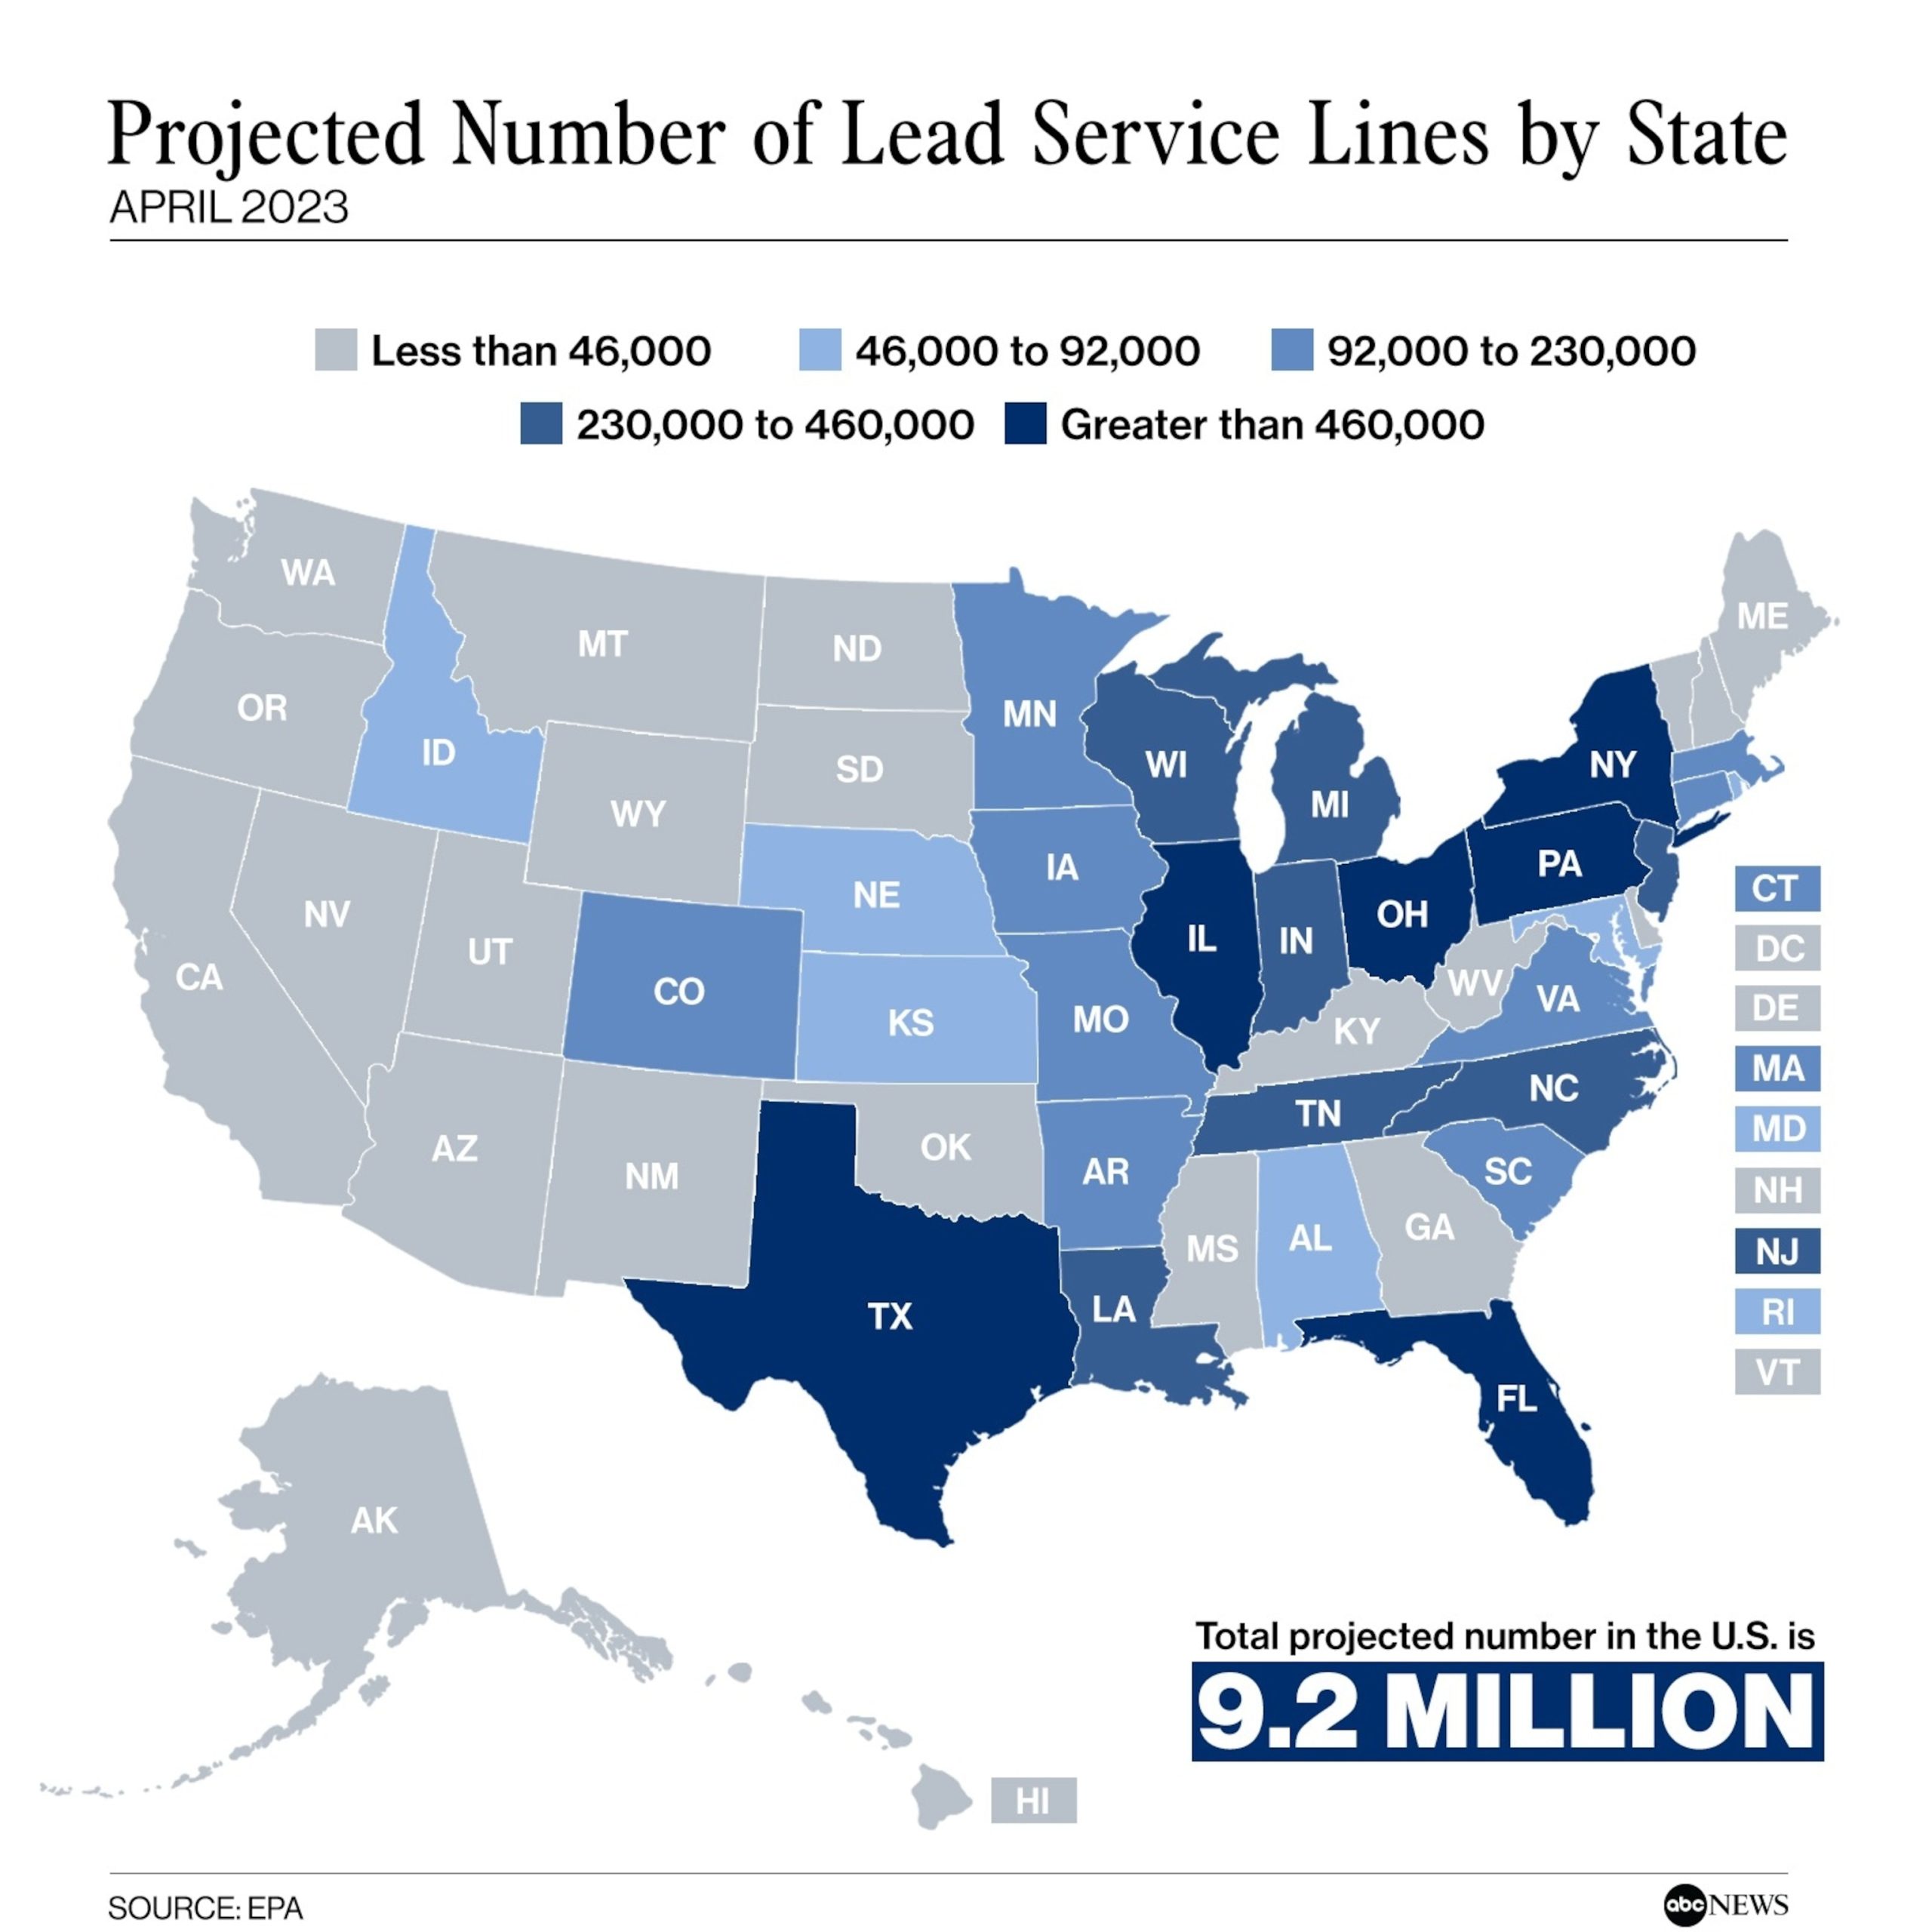 States that may benefit the most from Biden's plan to remove lead water lines